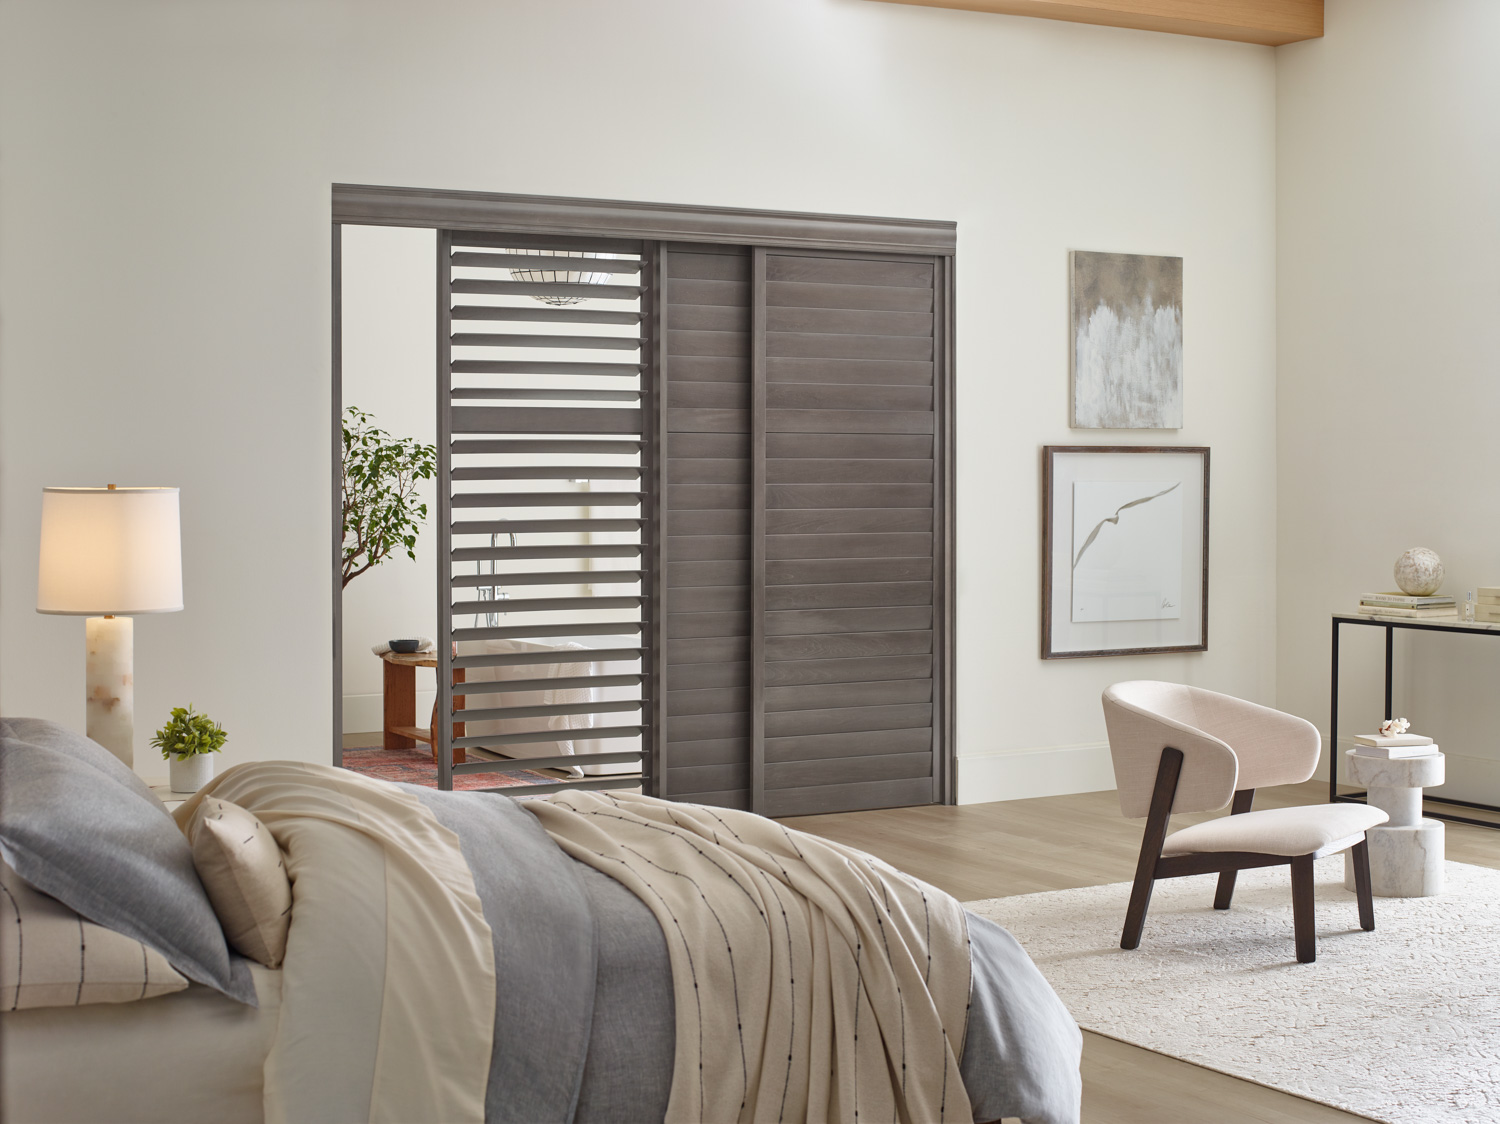 Sliding wood shutters in a bedroom, serving as a door, with a bed and chair.